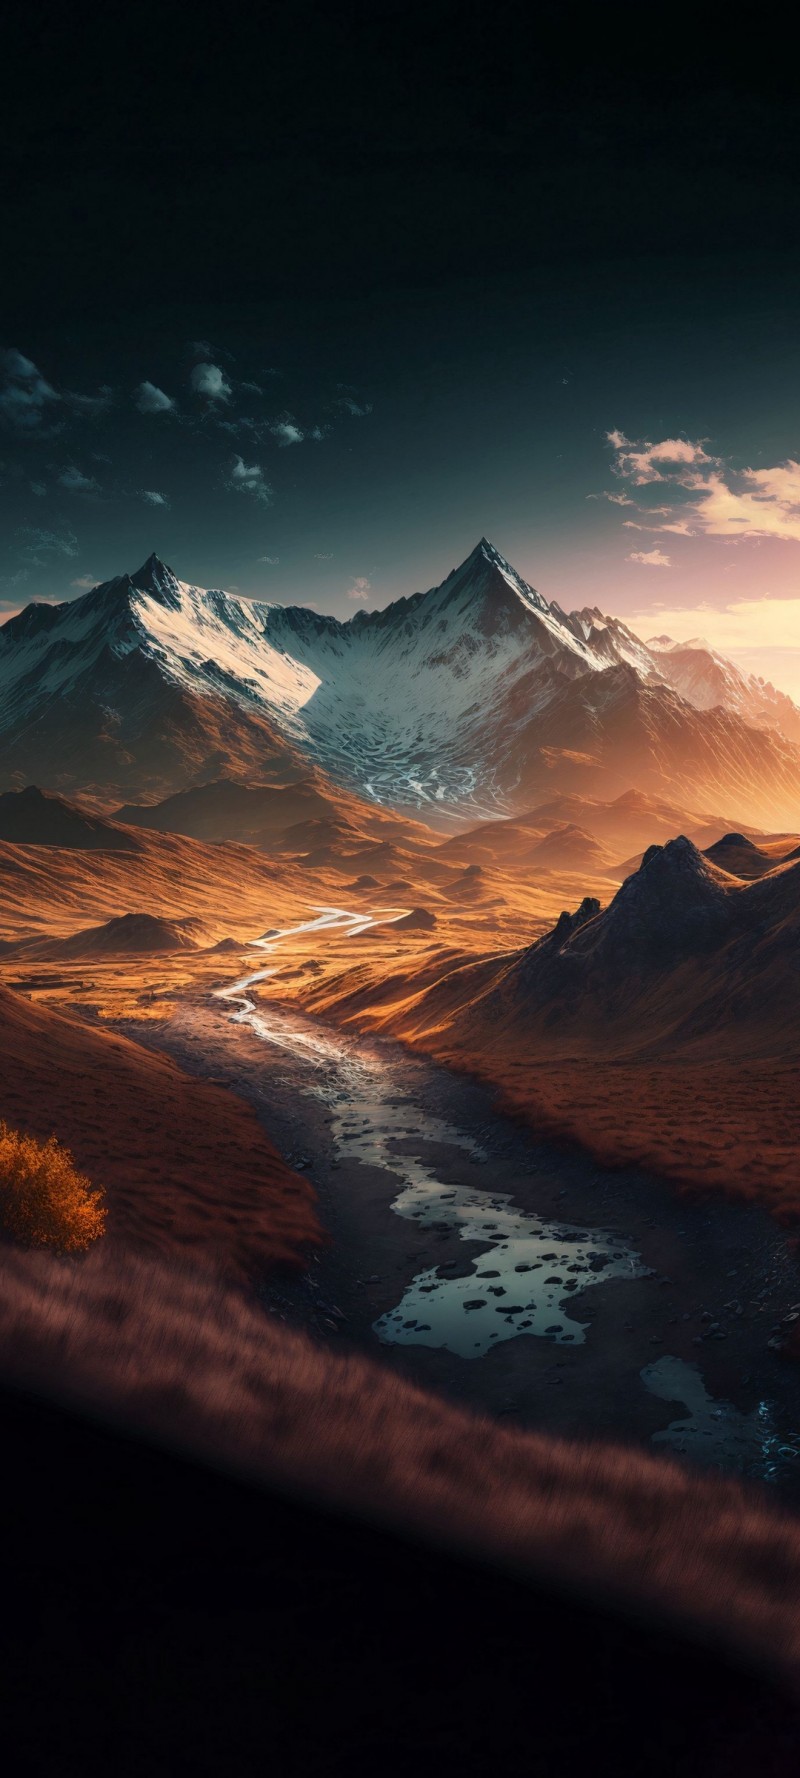 download Abstr montains 1080x2400.jpg